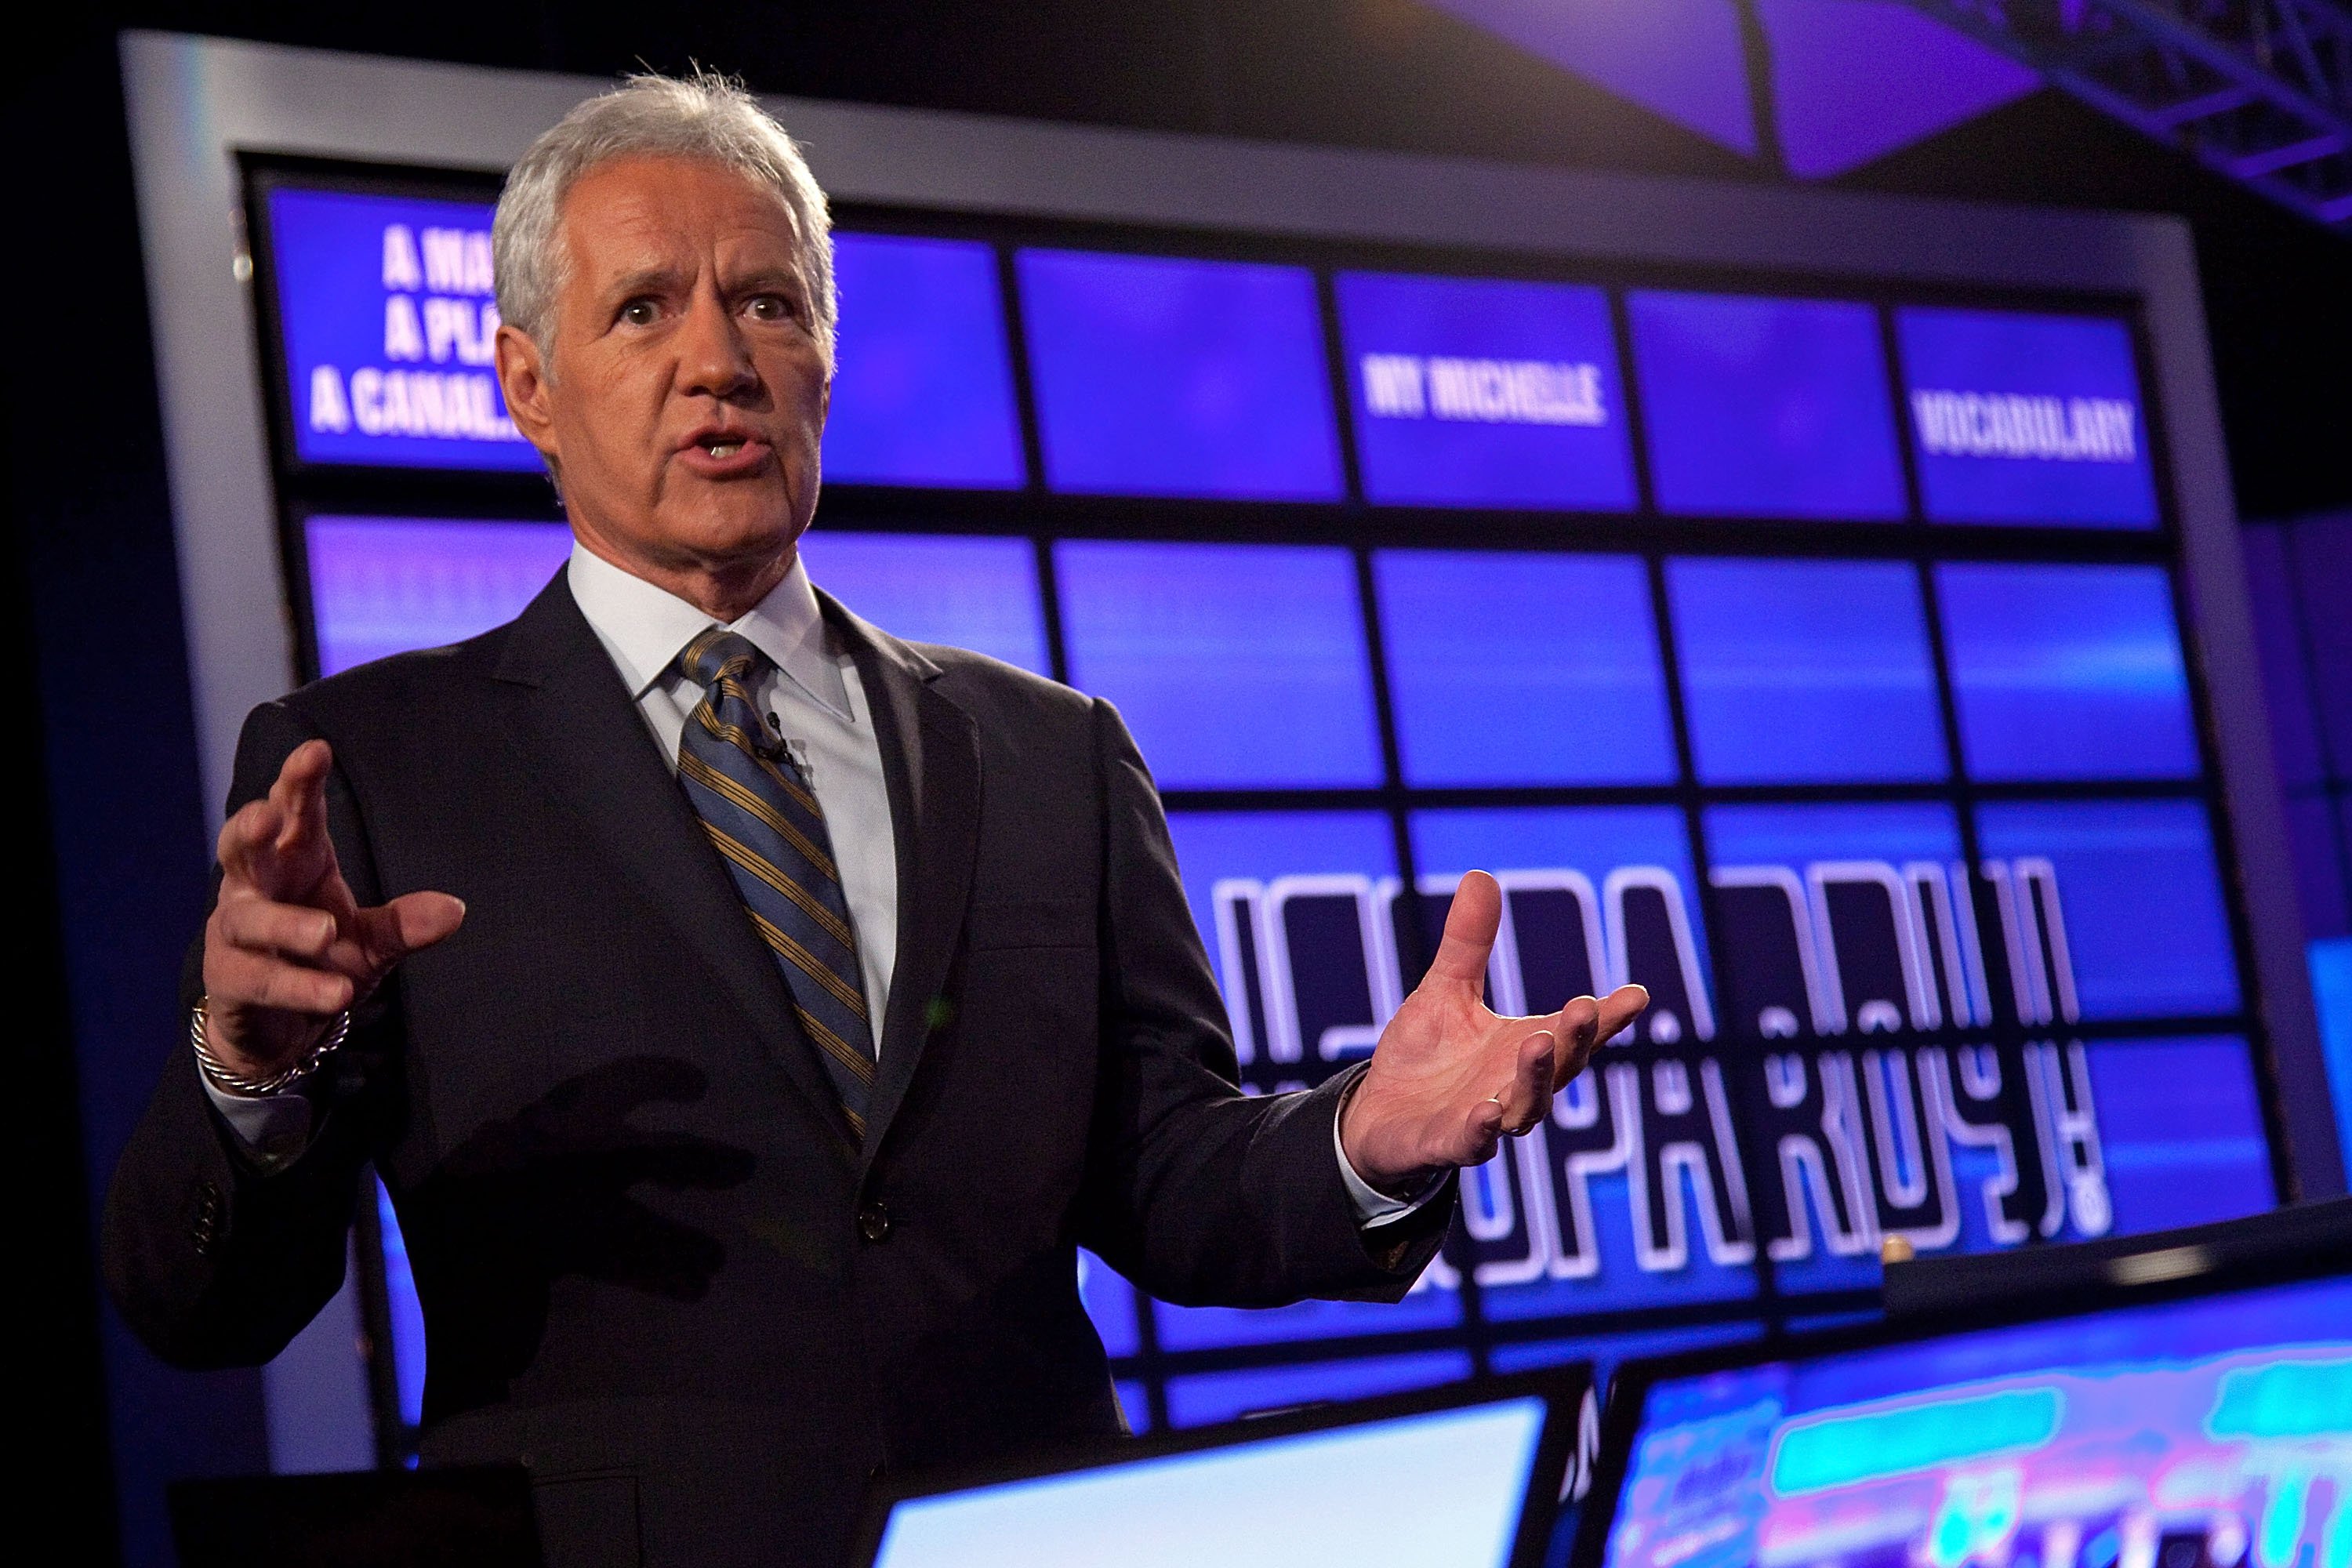 Alex Trebek attends a press conference to discuss the upcoming Man V. Machine 'Jeopardy!' competition at the IBM T.J. Watson Research Center 